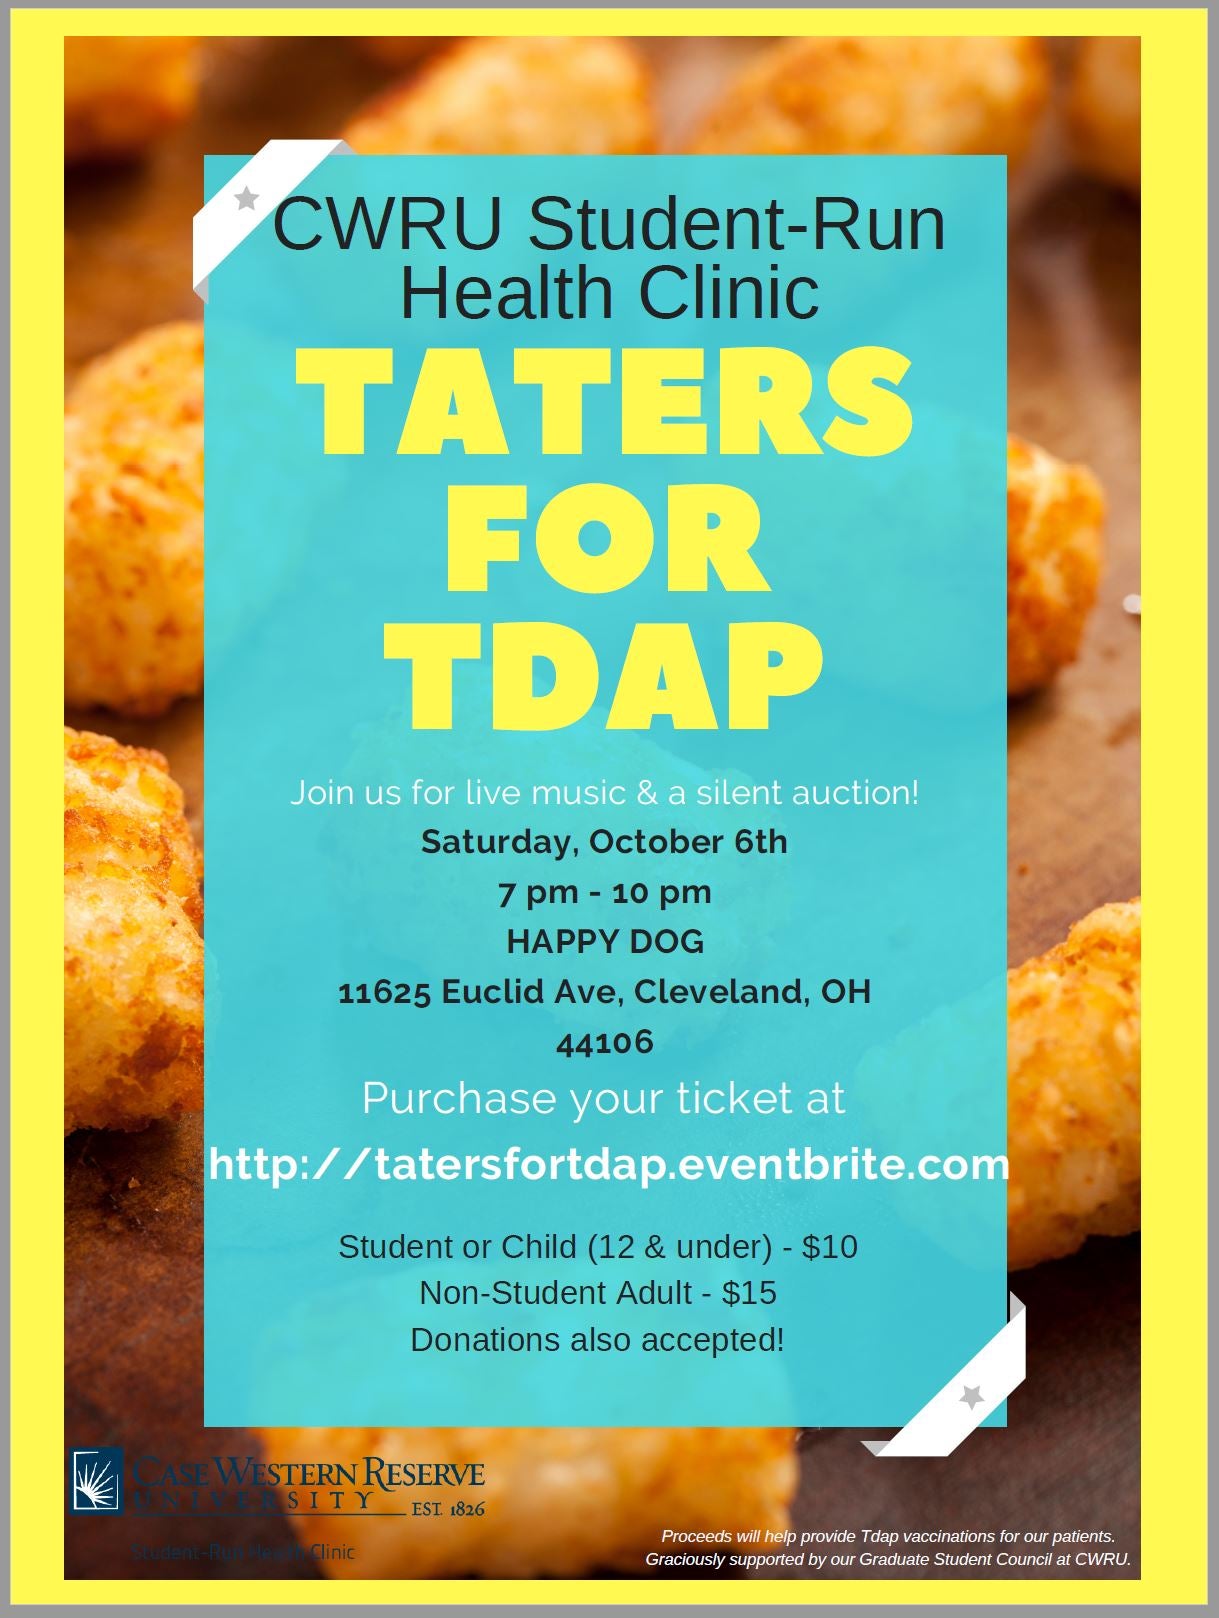 Flyer for Tater for Tdap event